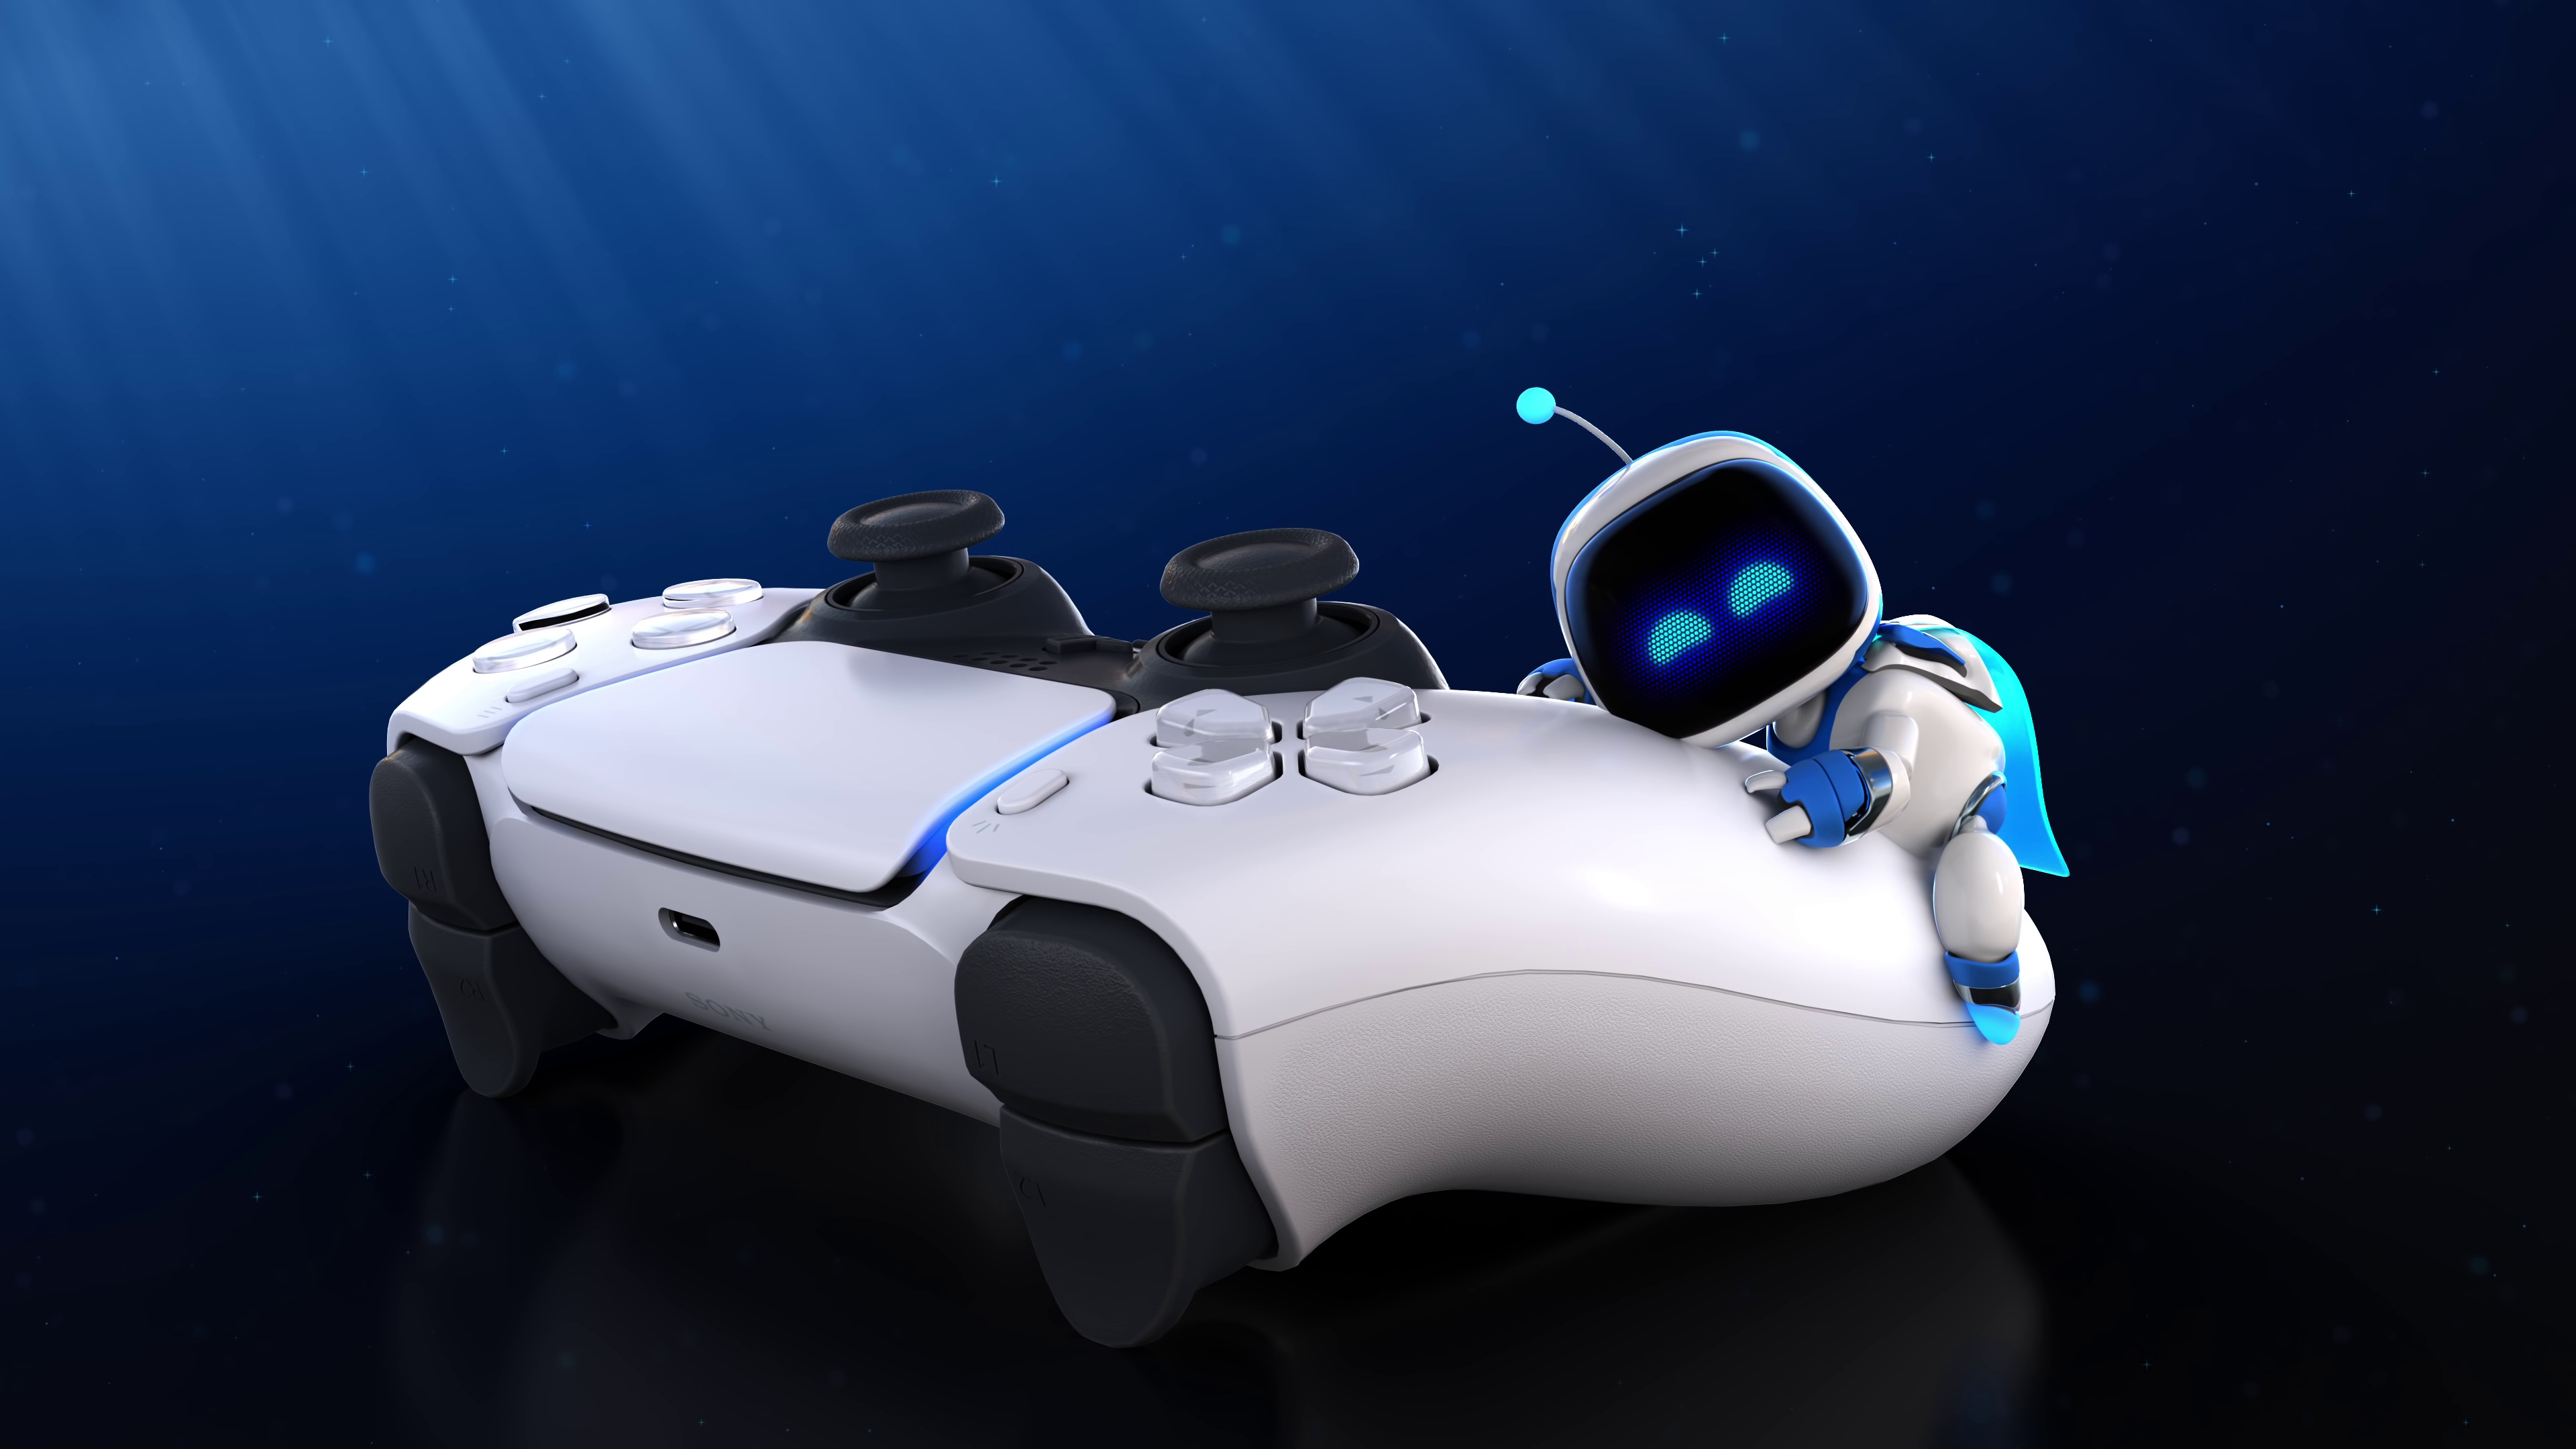 Astro Bot with the PS5 controller 4k Ultra HD Wallpaper